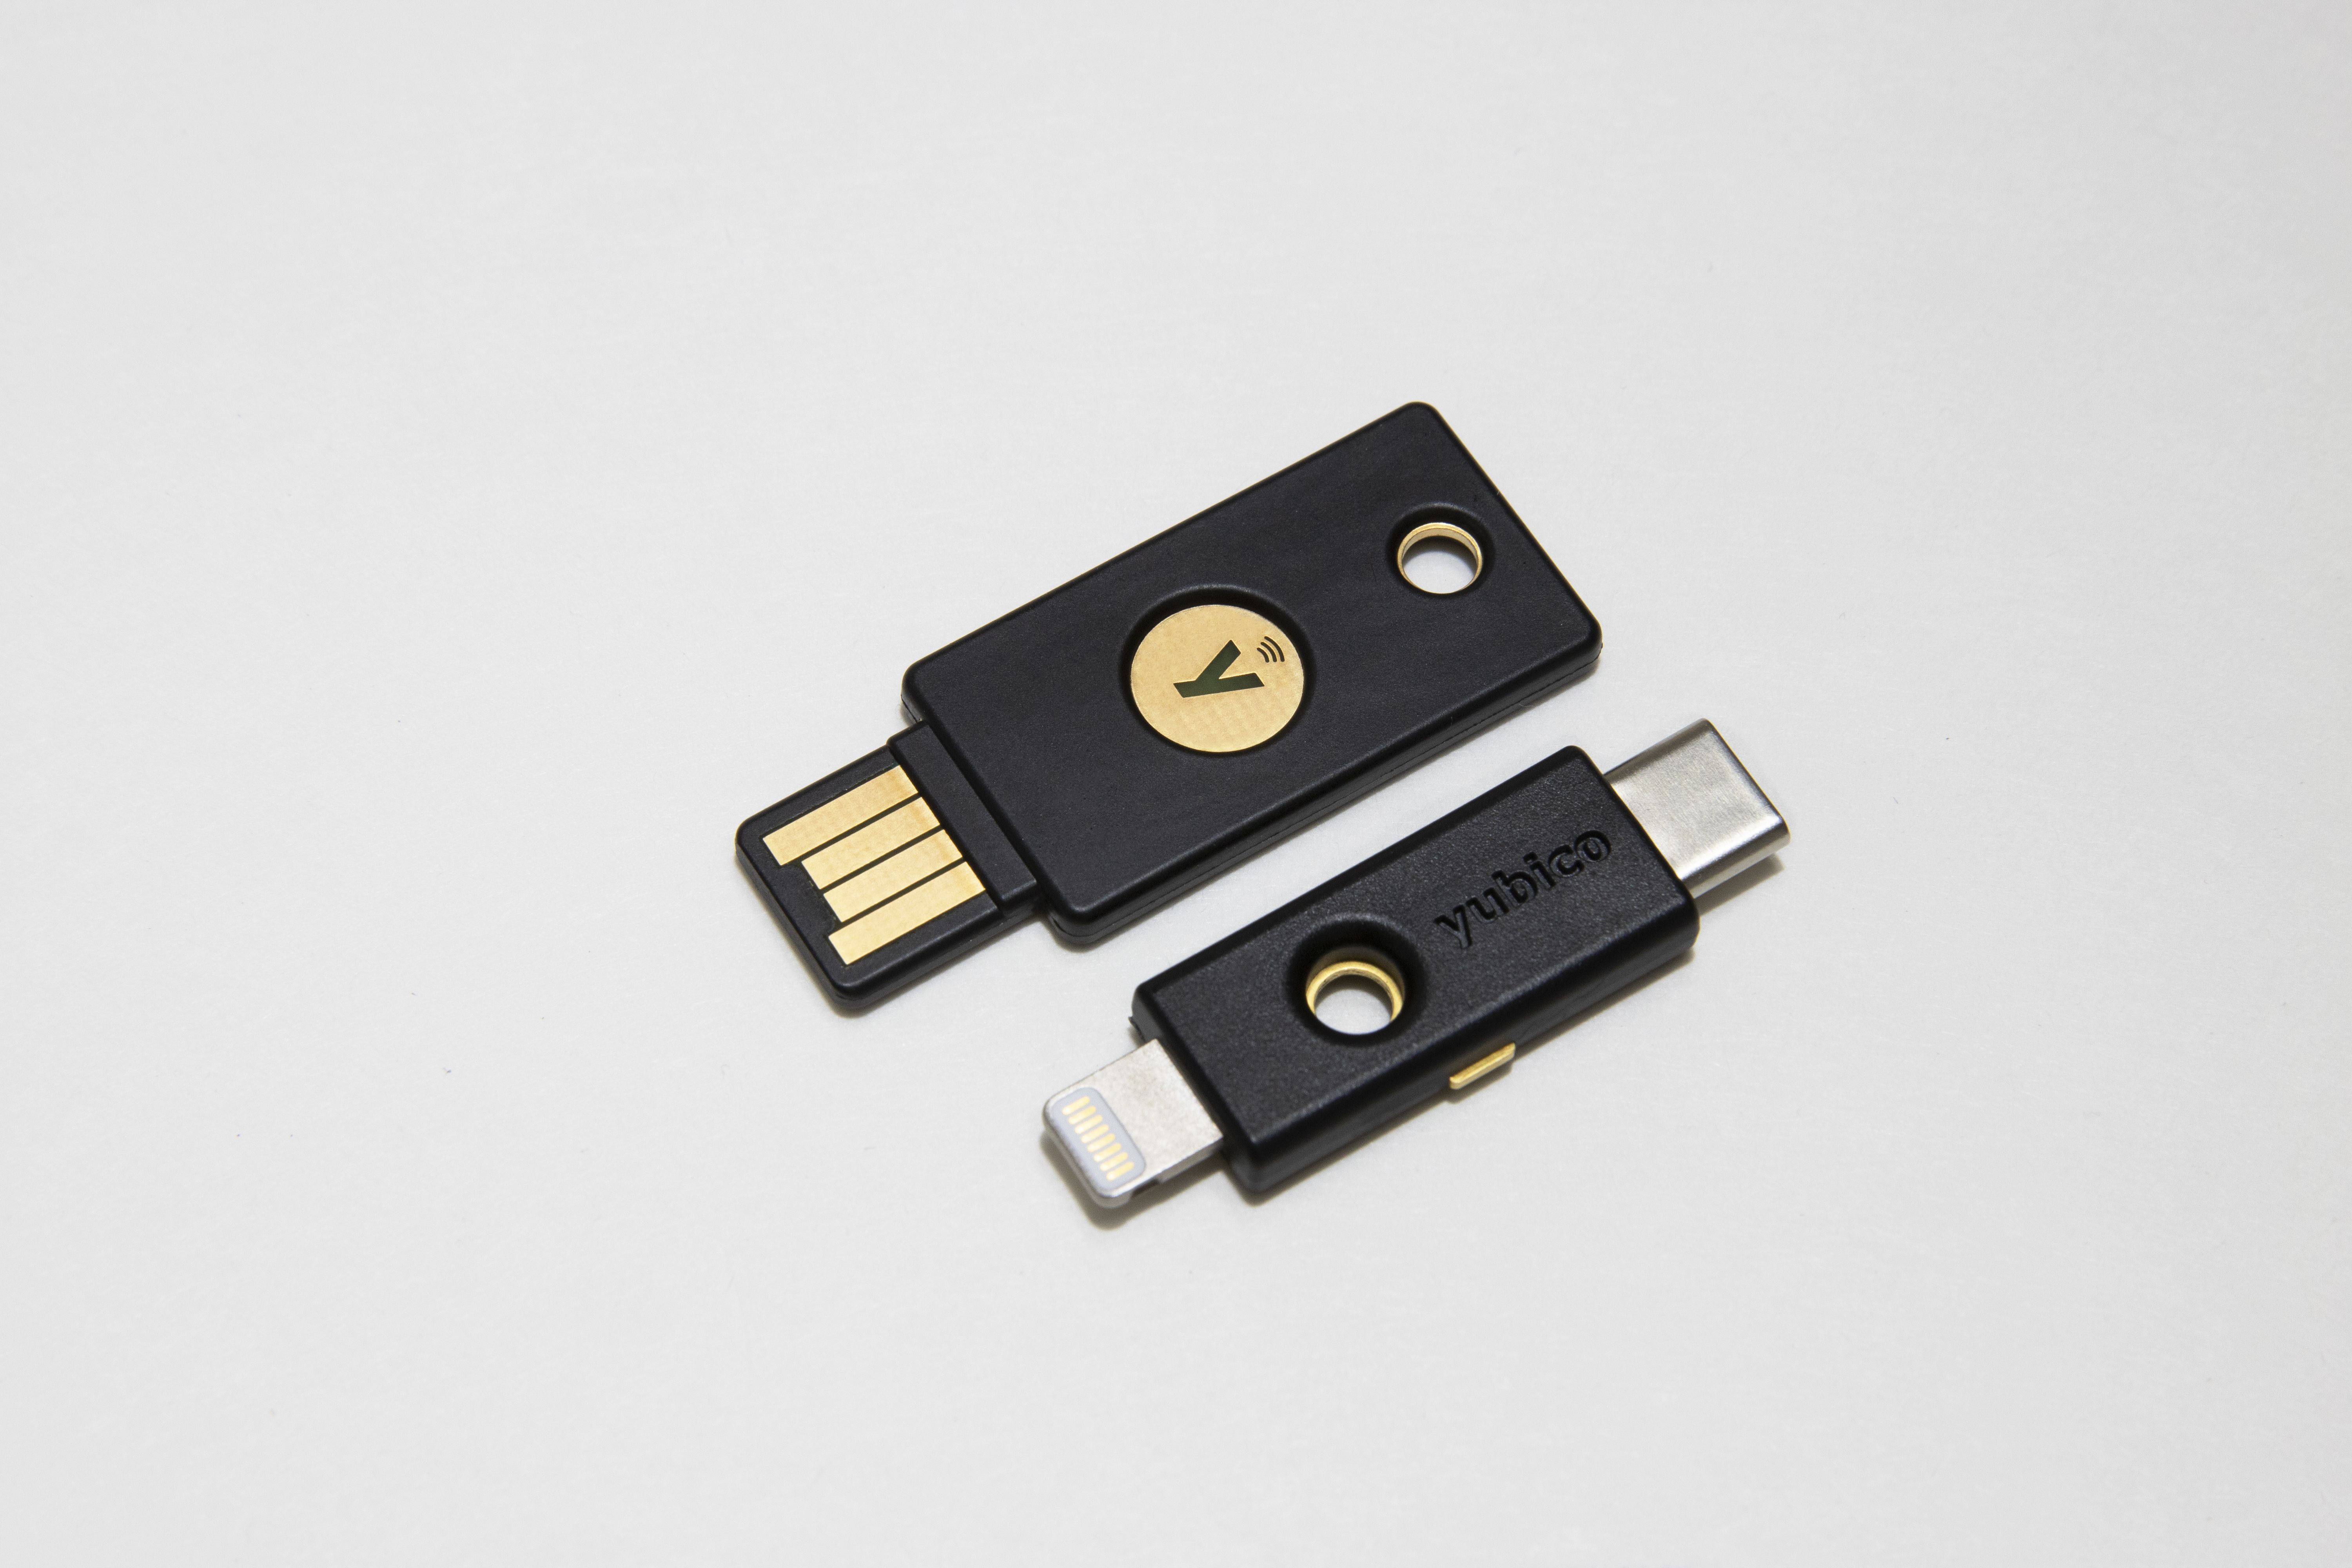 format a flash drive for windows and mac